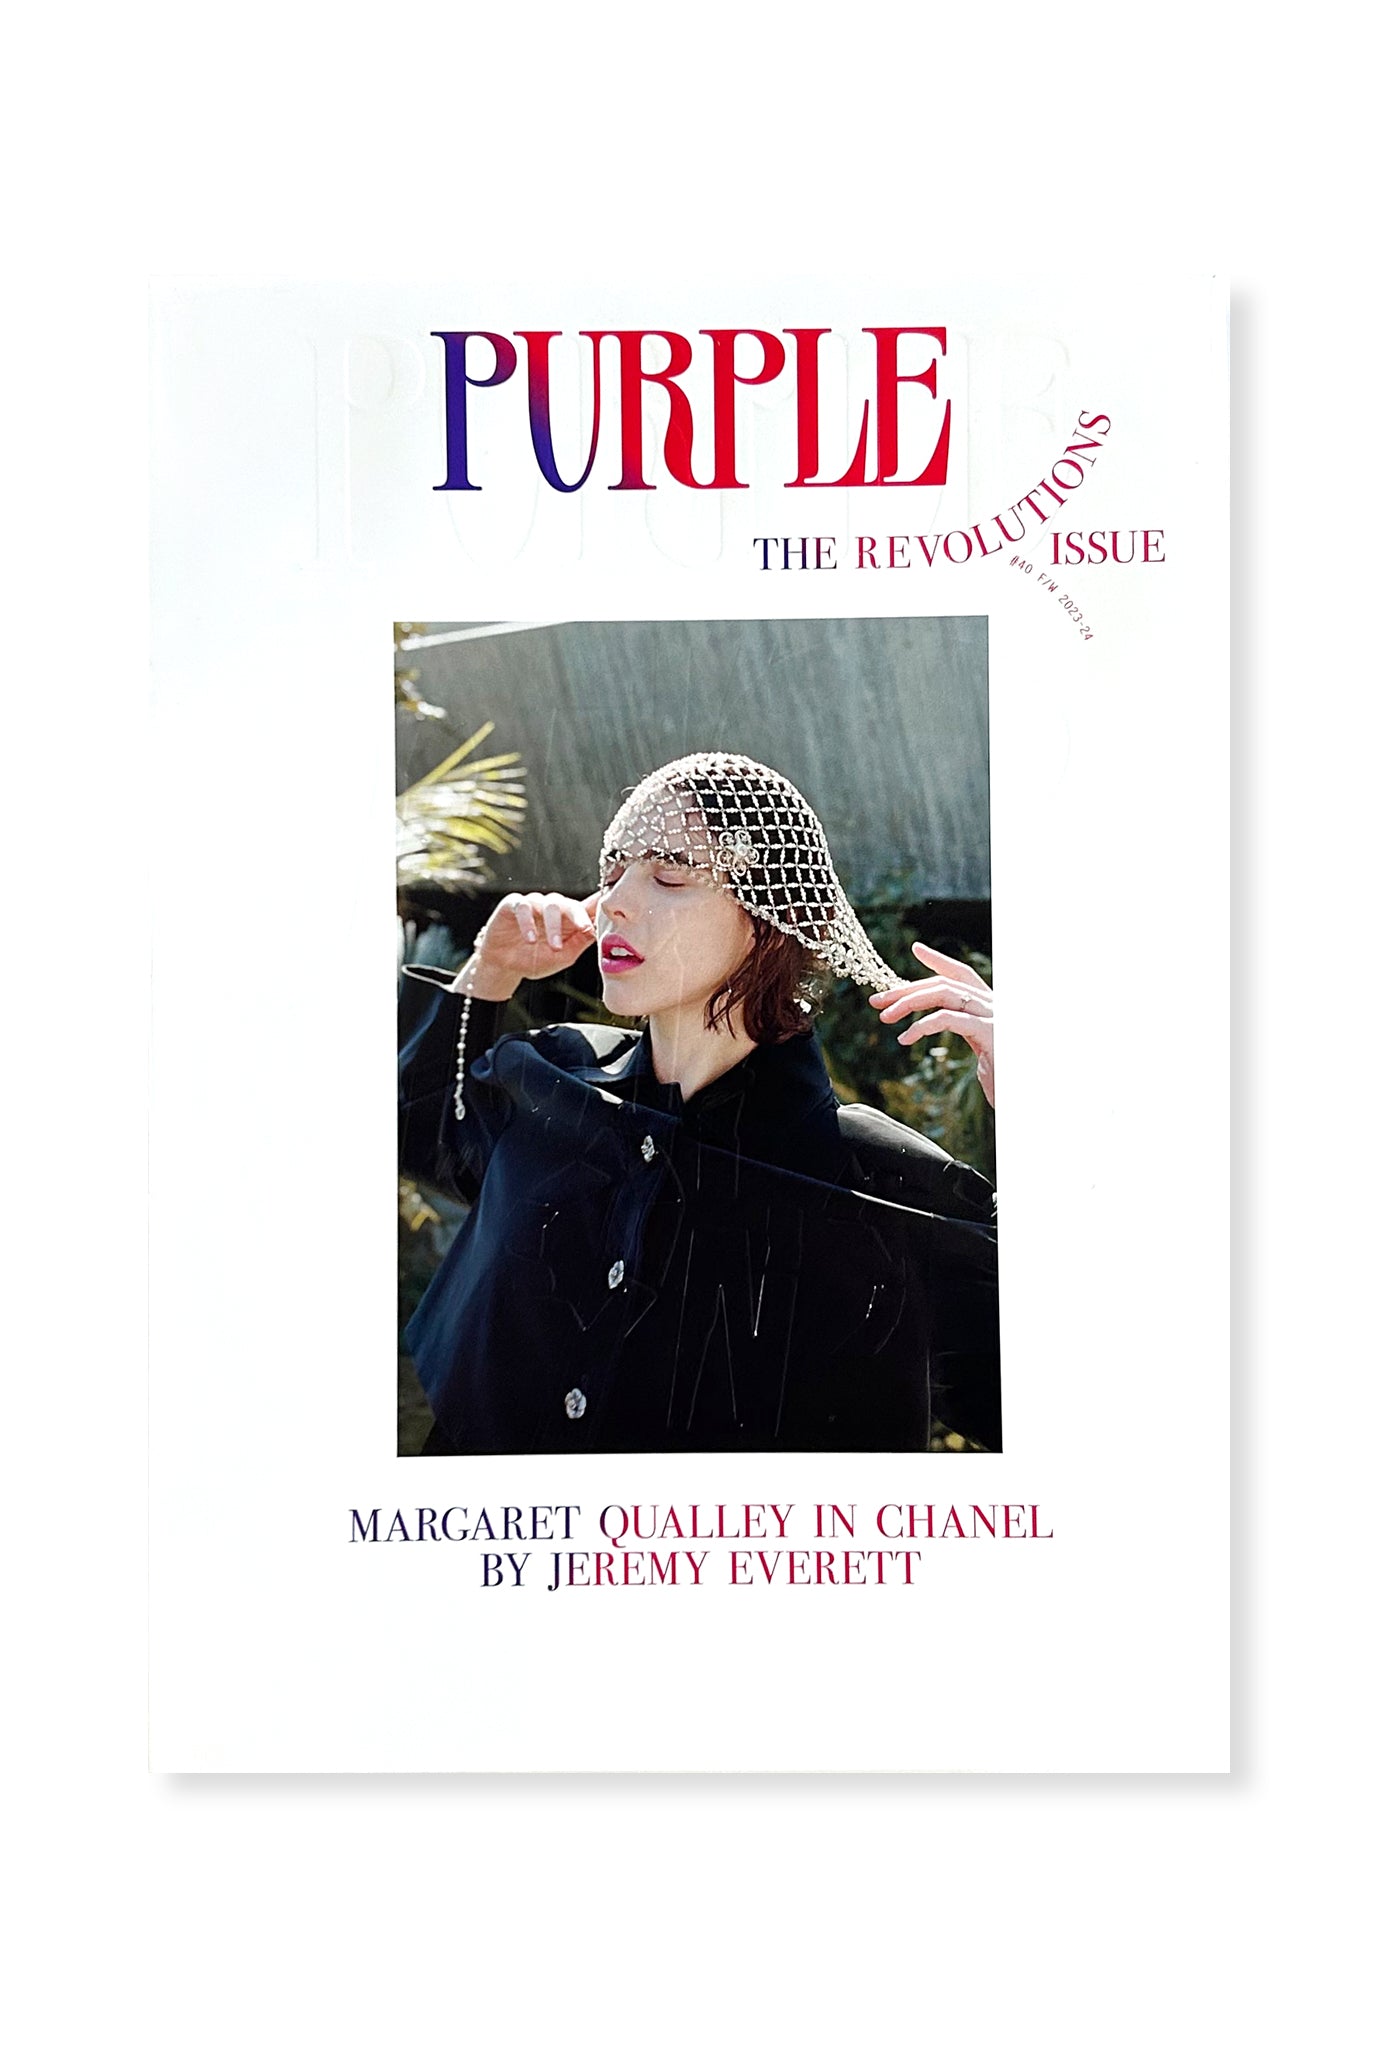 Purple, Issue 40 - The Revolutions Issue